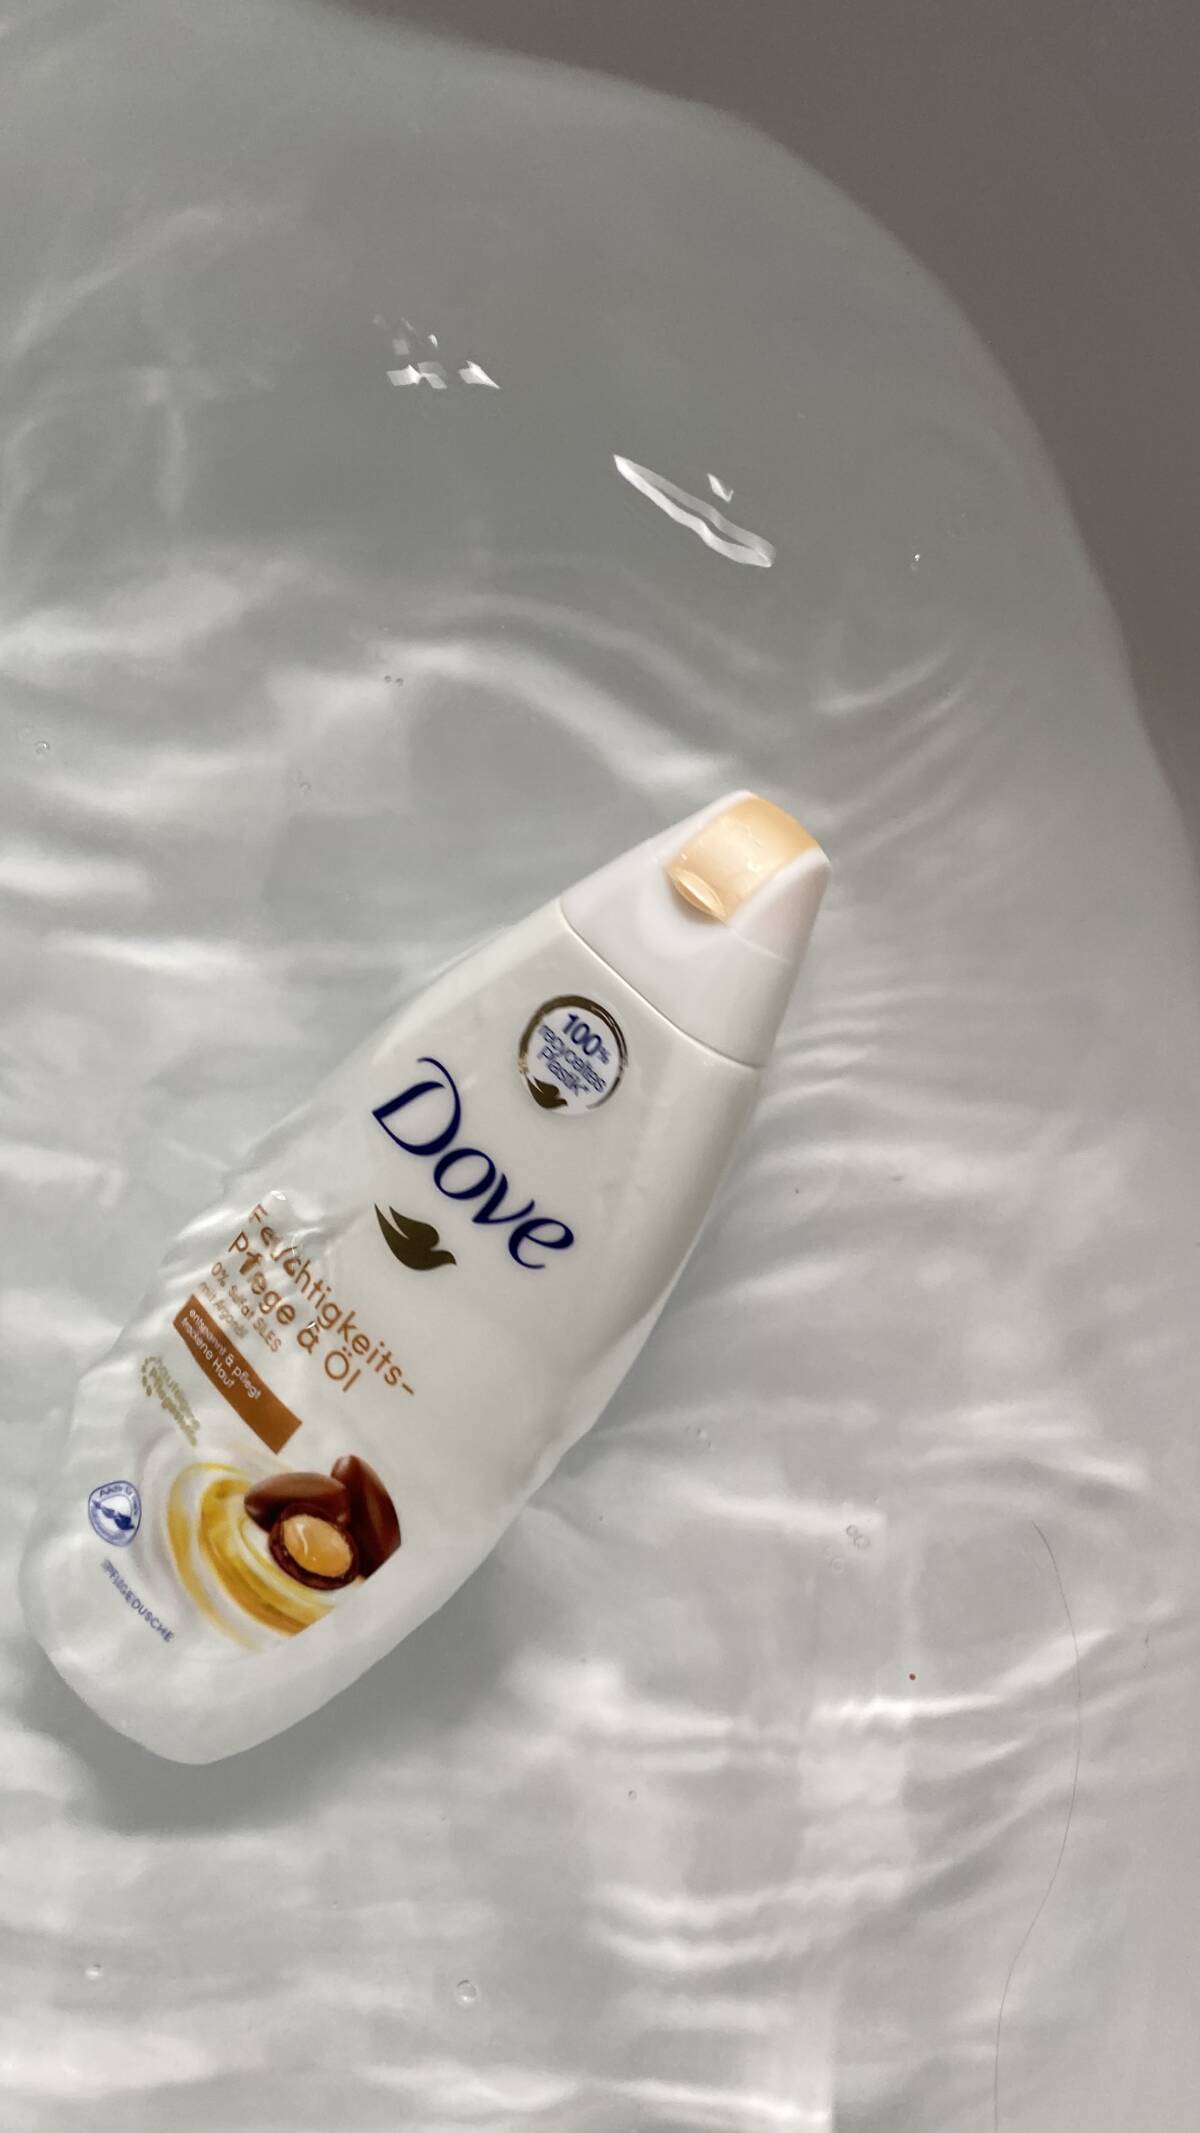 Dove recycling Challenge